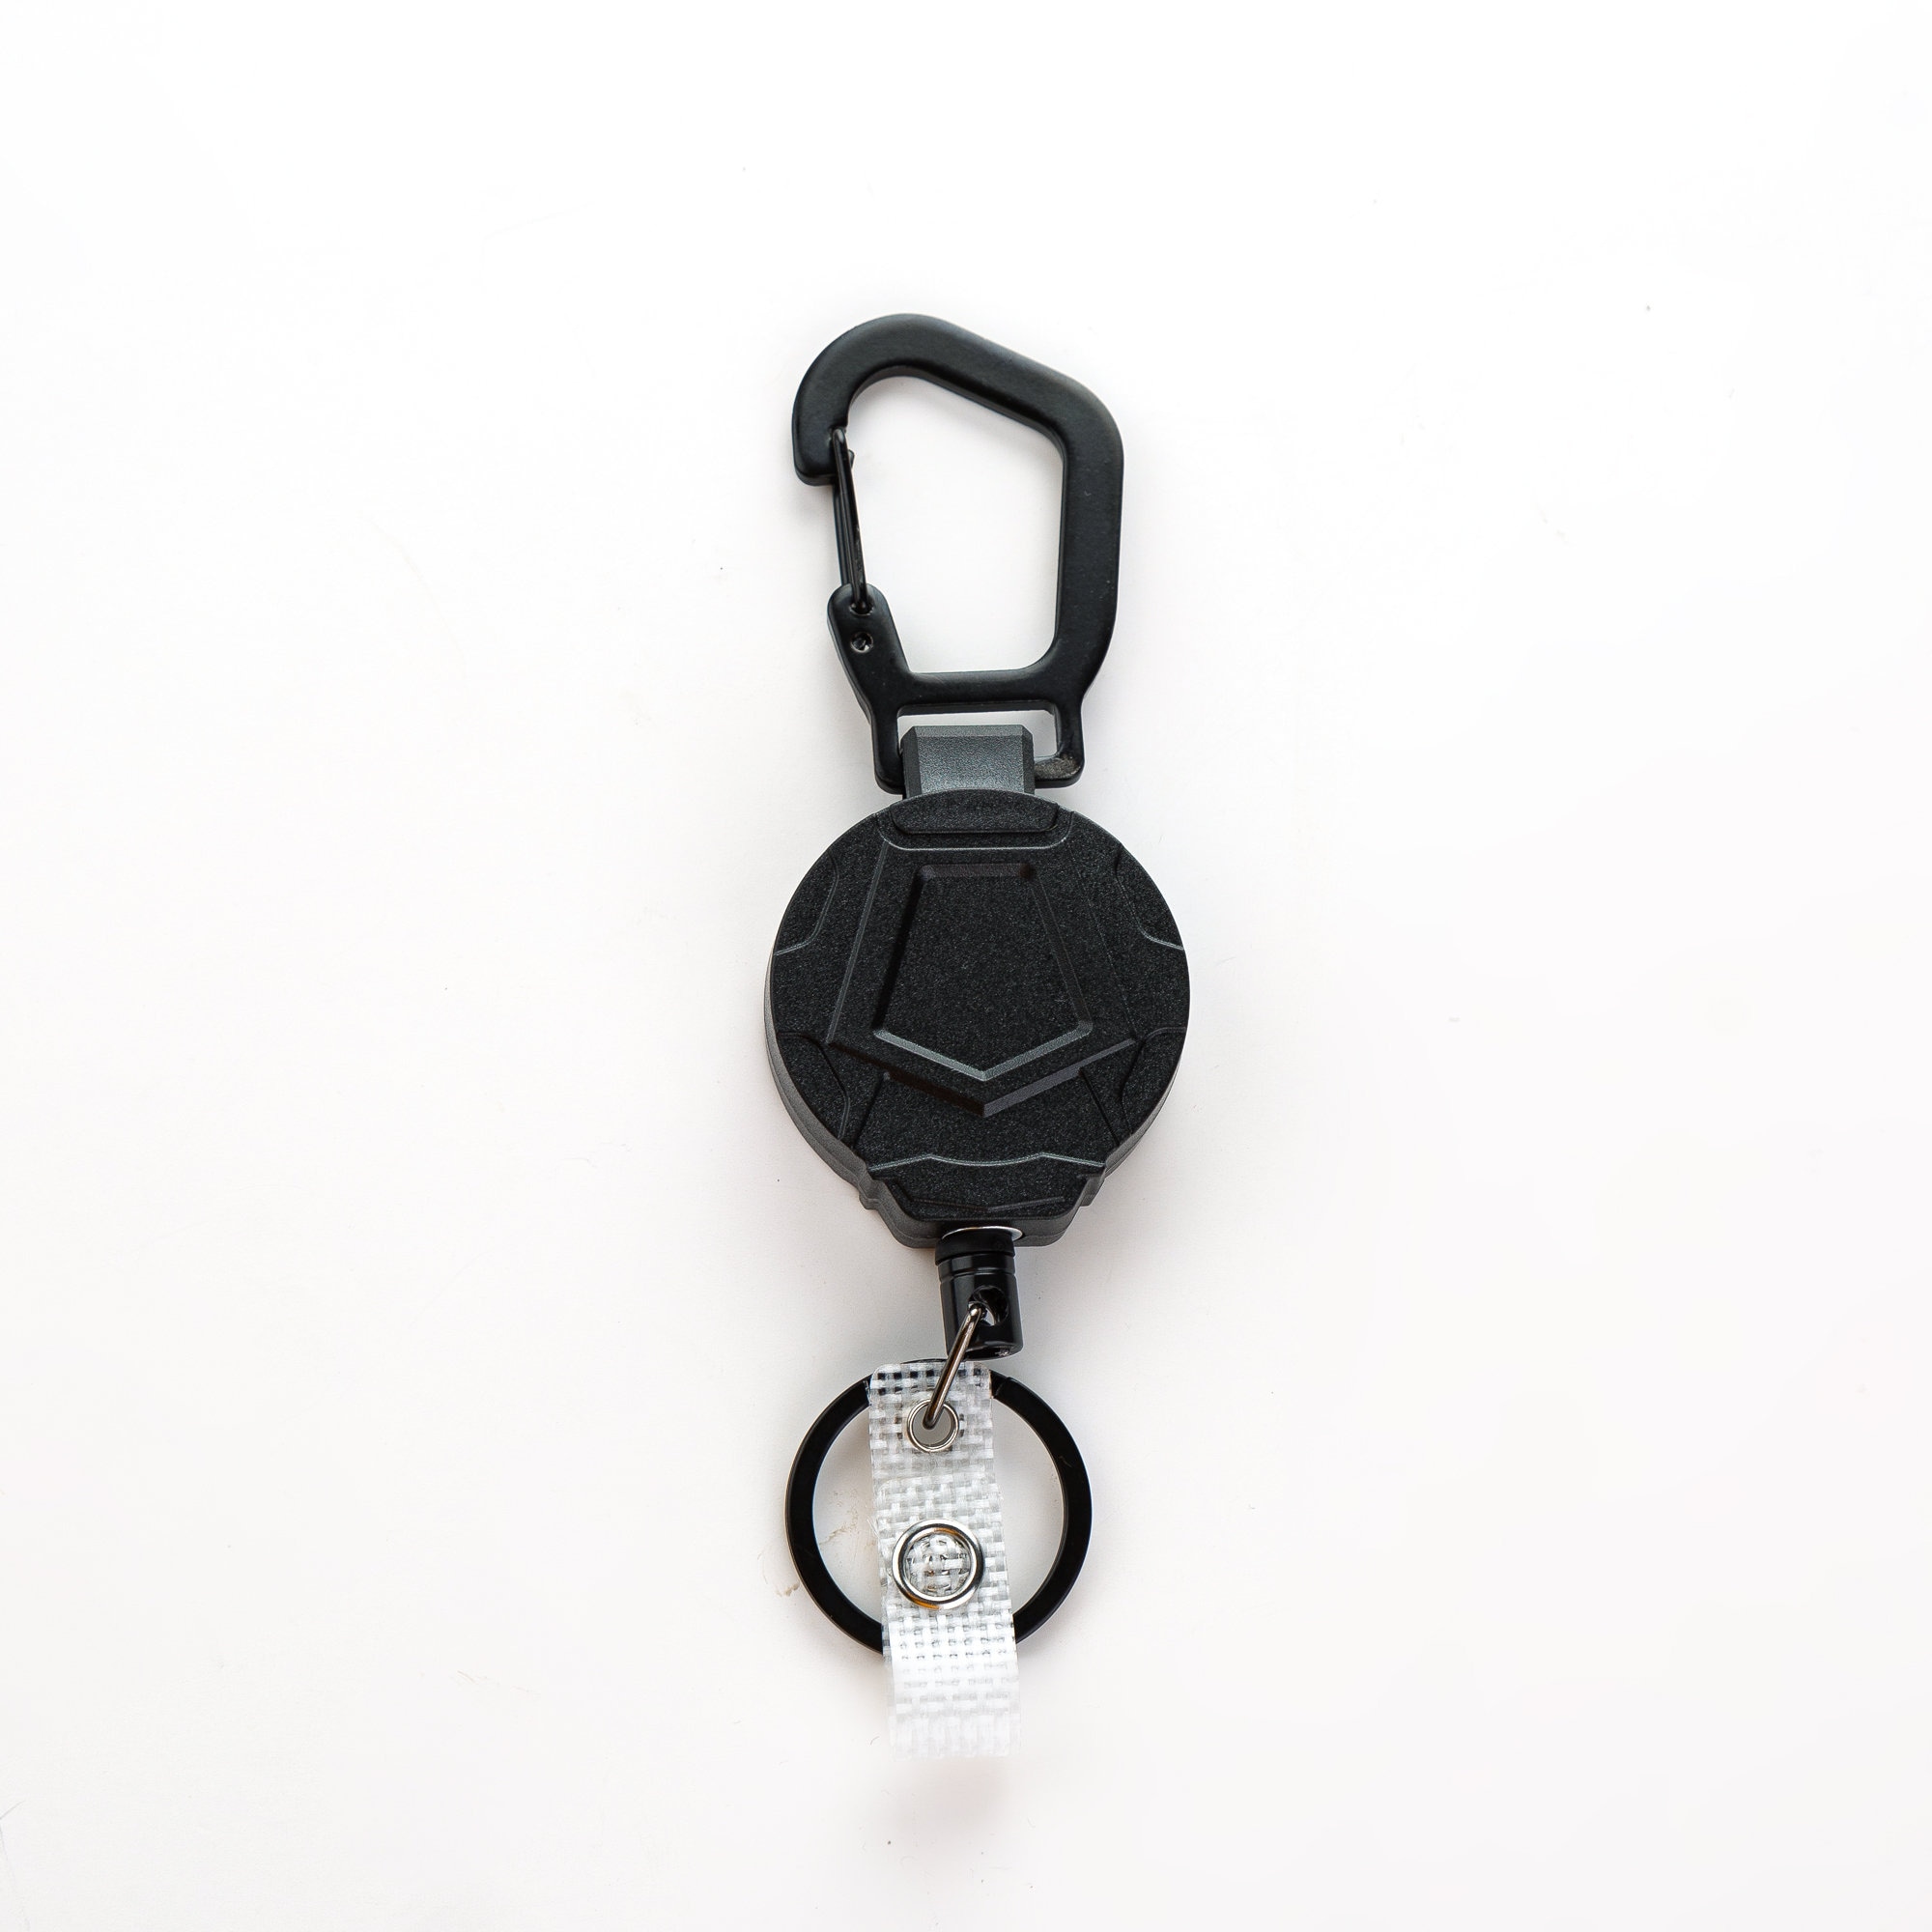 65cm Retractable Keyring Metal Wire Keychain Clip Pull Recoil